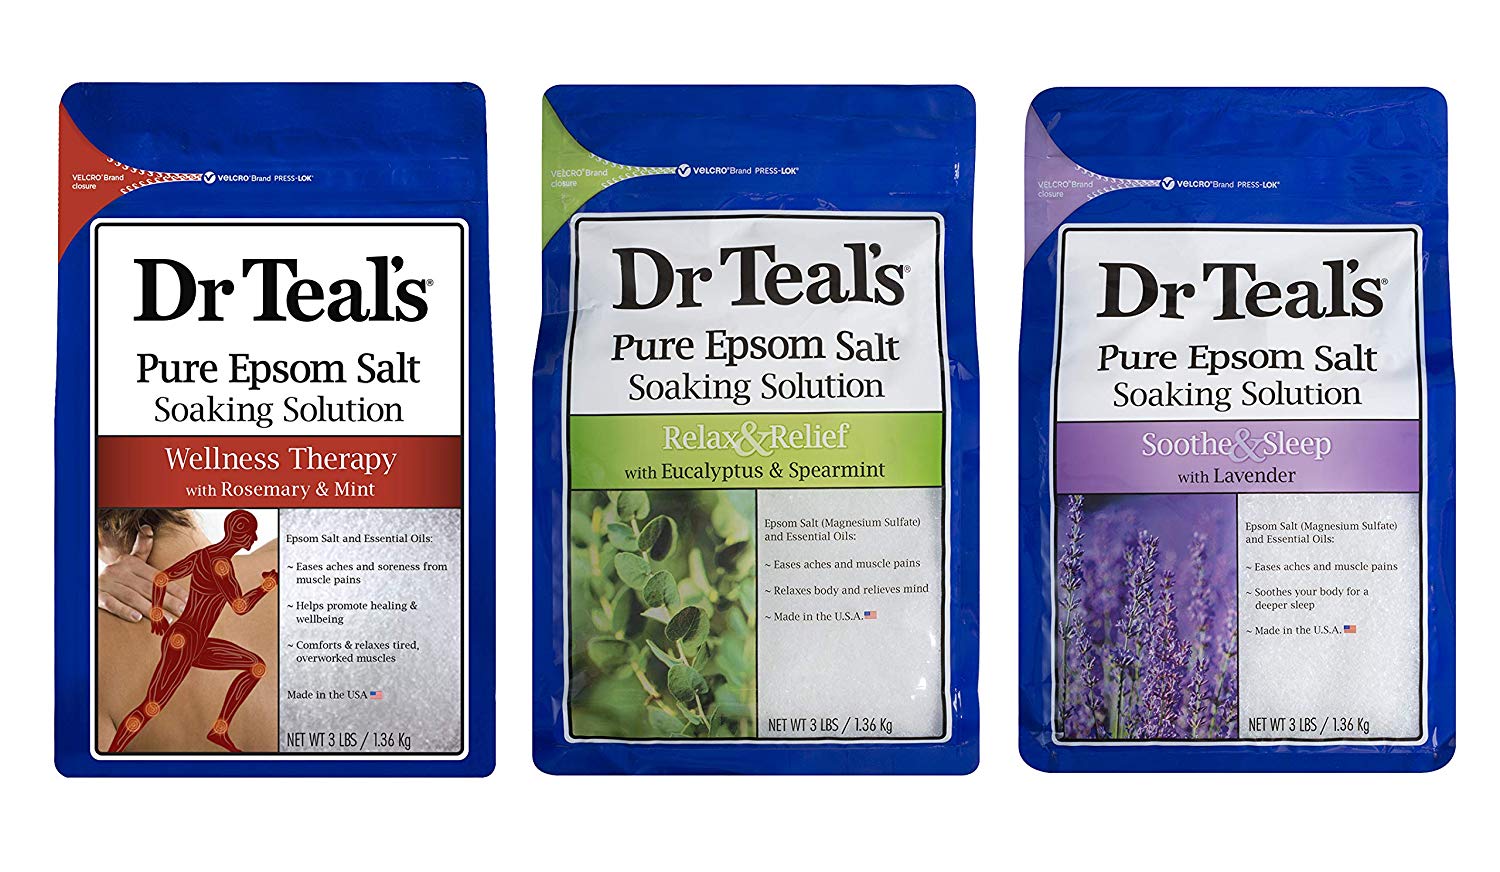 Dr. Teal's epsom salts 3-pack: Relax & Relief Eucalyptus Spearmint, 1 Sooth & Sleep Lavender and 1 Therapy & Relief Rosemary and Mint